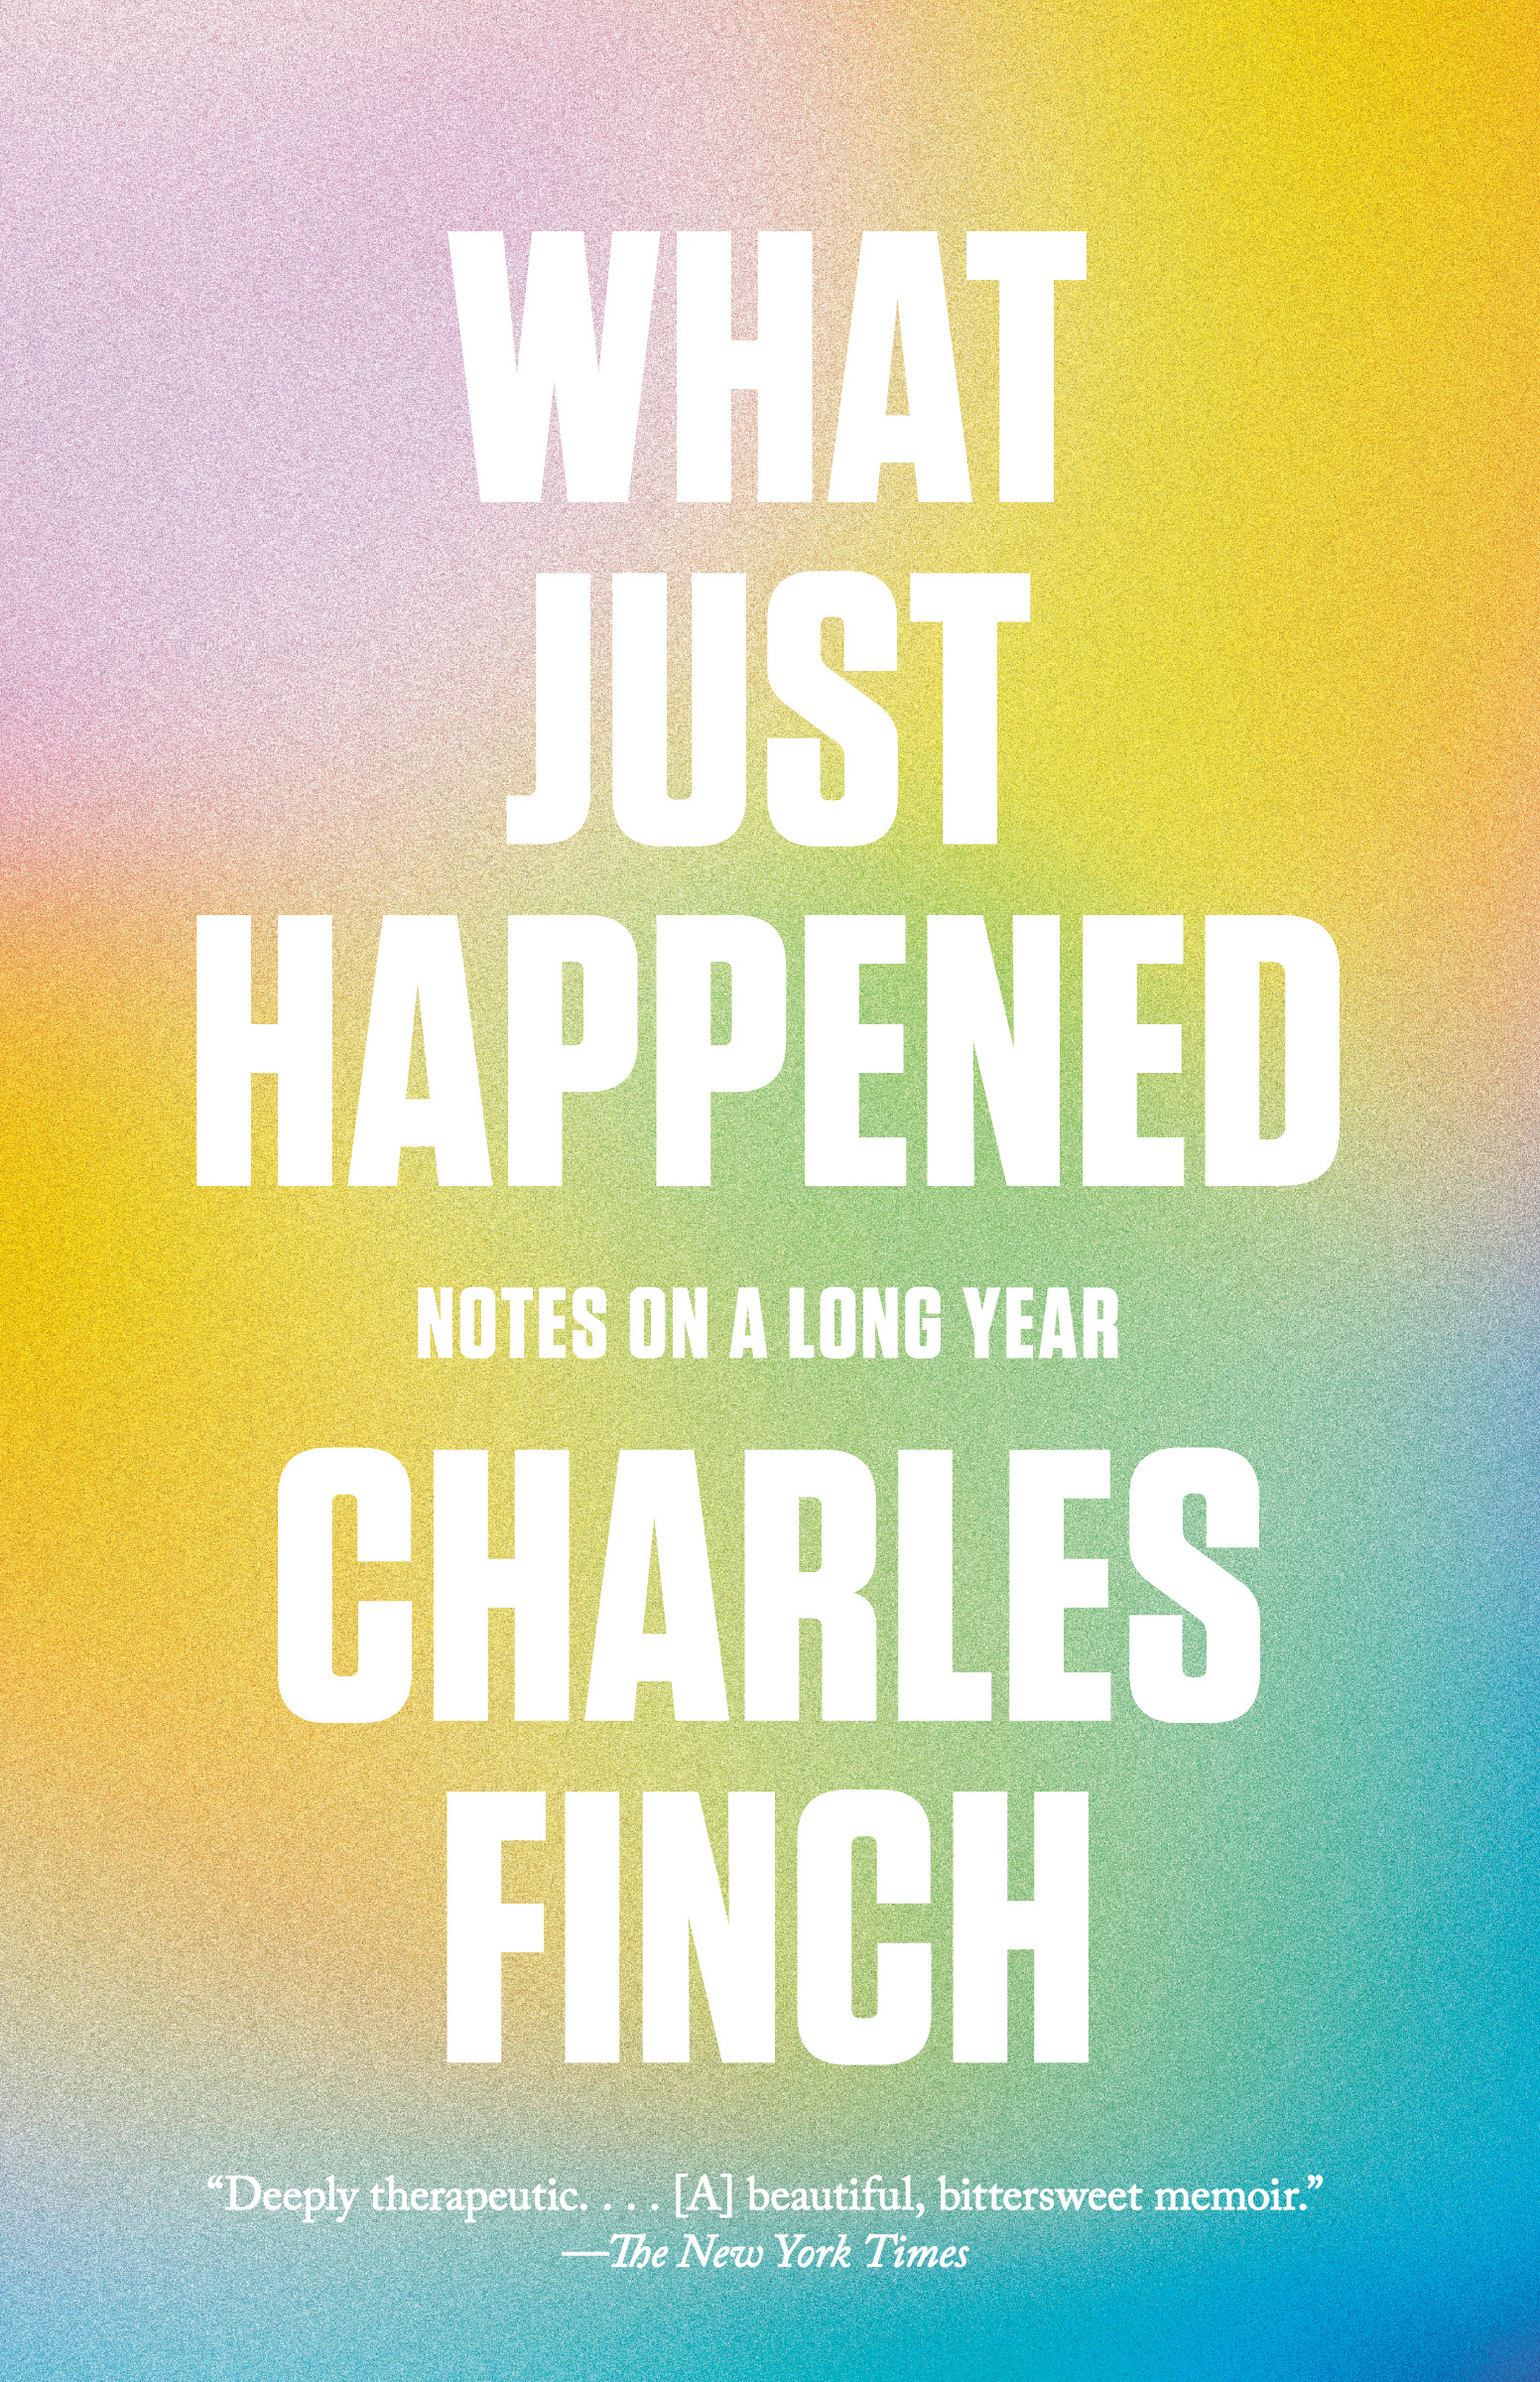 What Just Happened : Notes on a Long Year | Finch, Charles (Auteur)